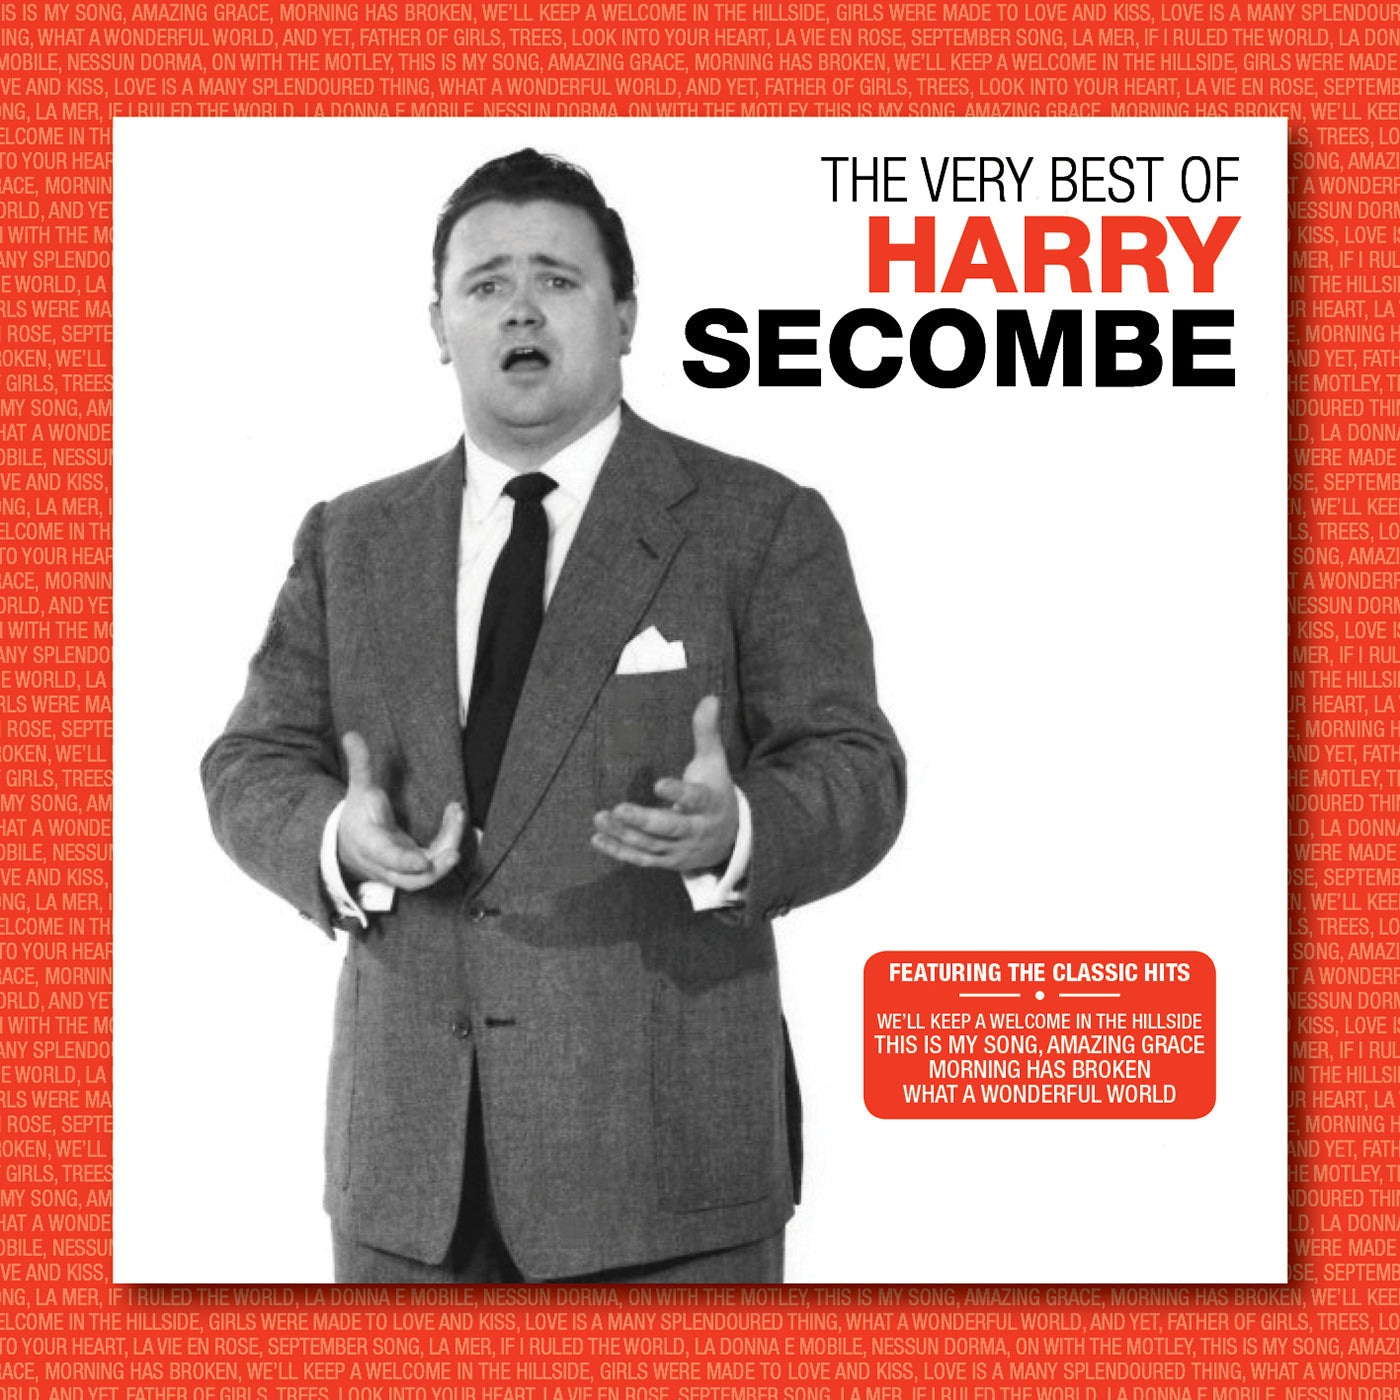 HARRY SECOMBE - THE VERY BEST OF